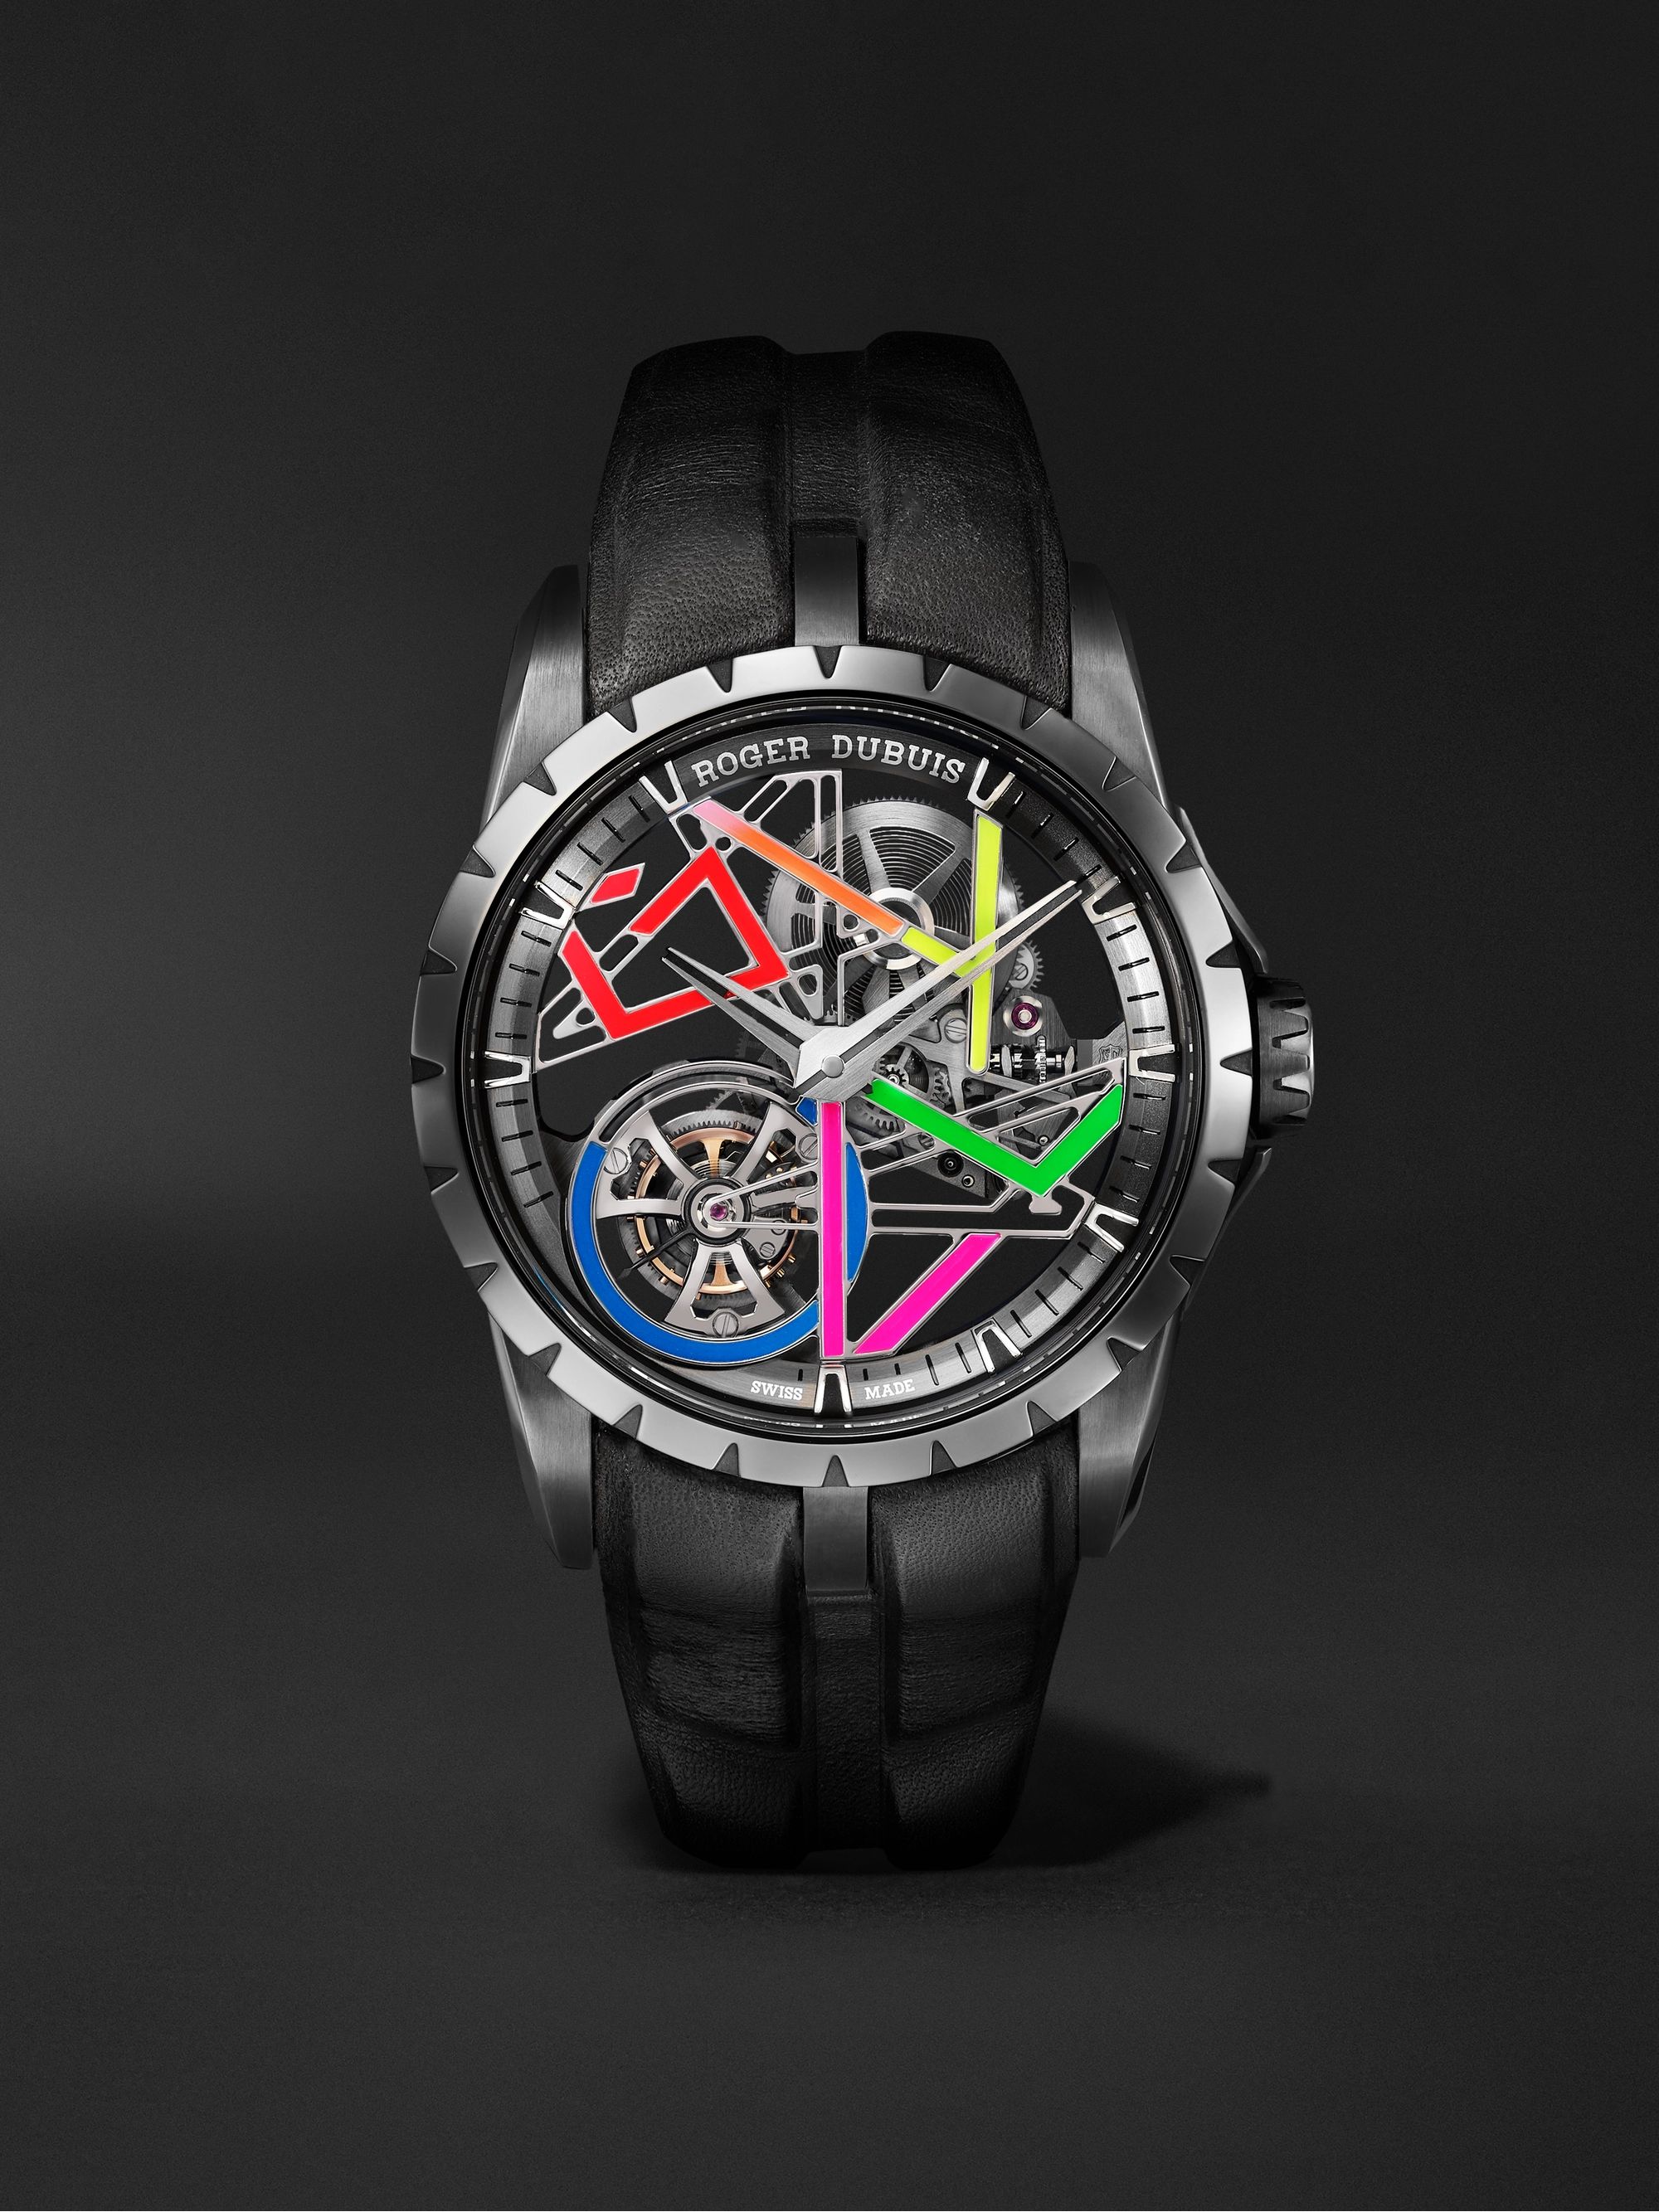 ROGER DUBUIS + Gully Excalibur Limited Edition Hand-Wound Skeleton Flying Tourbillon 42mm Titanium and Leather Watch, Ref. No. EX0931